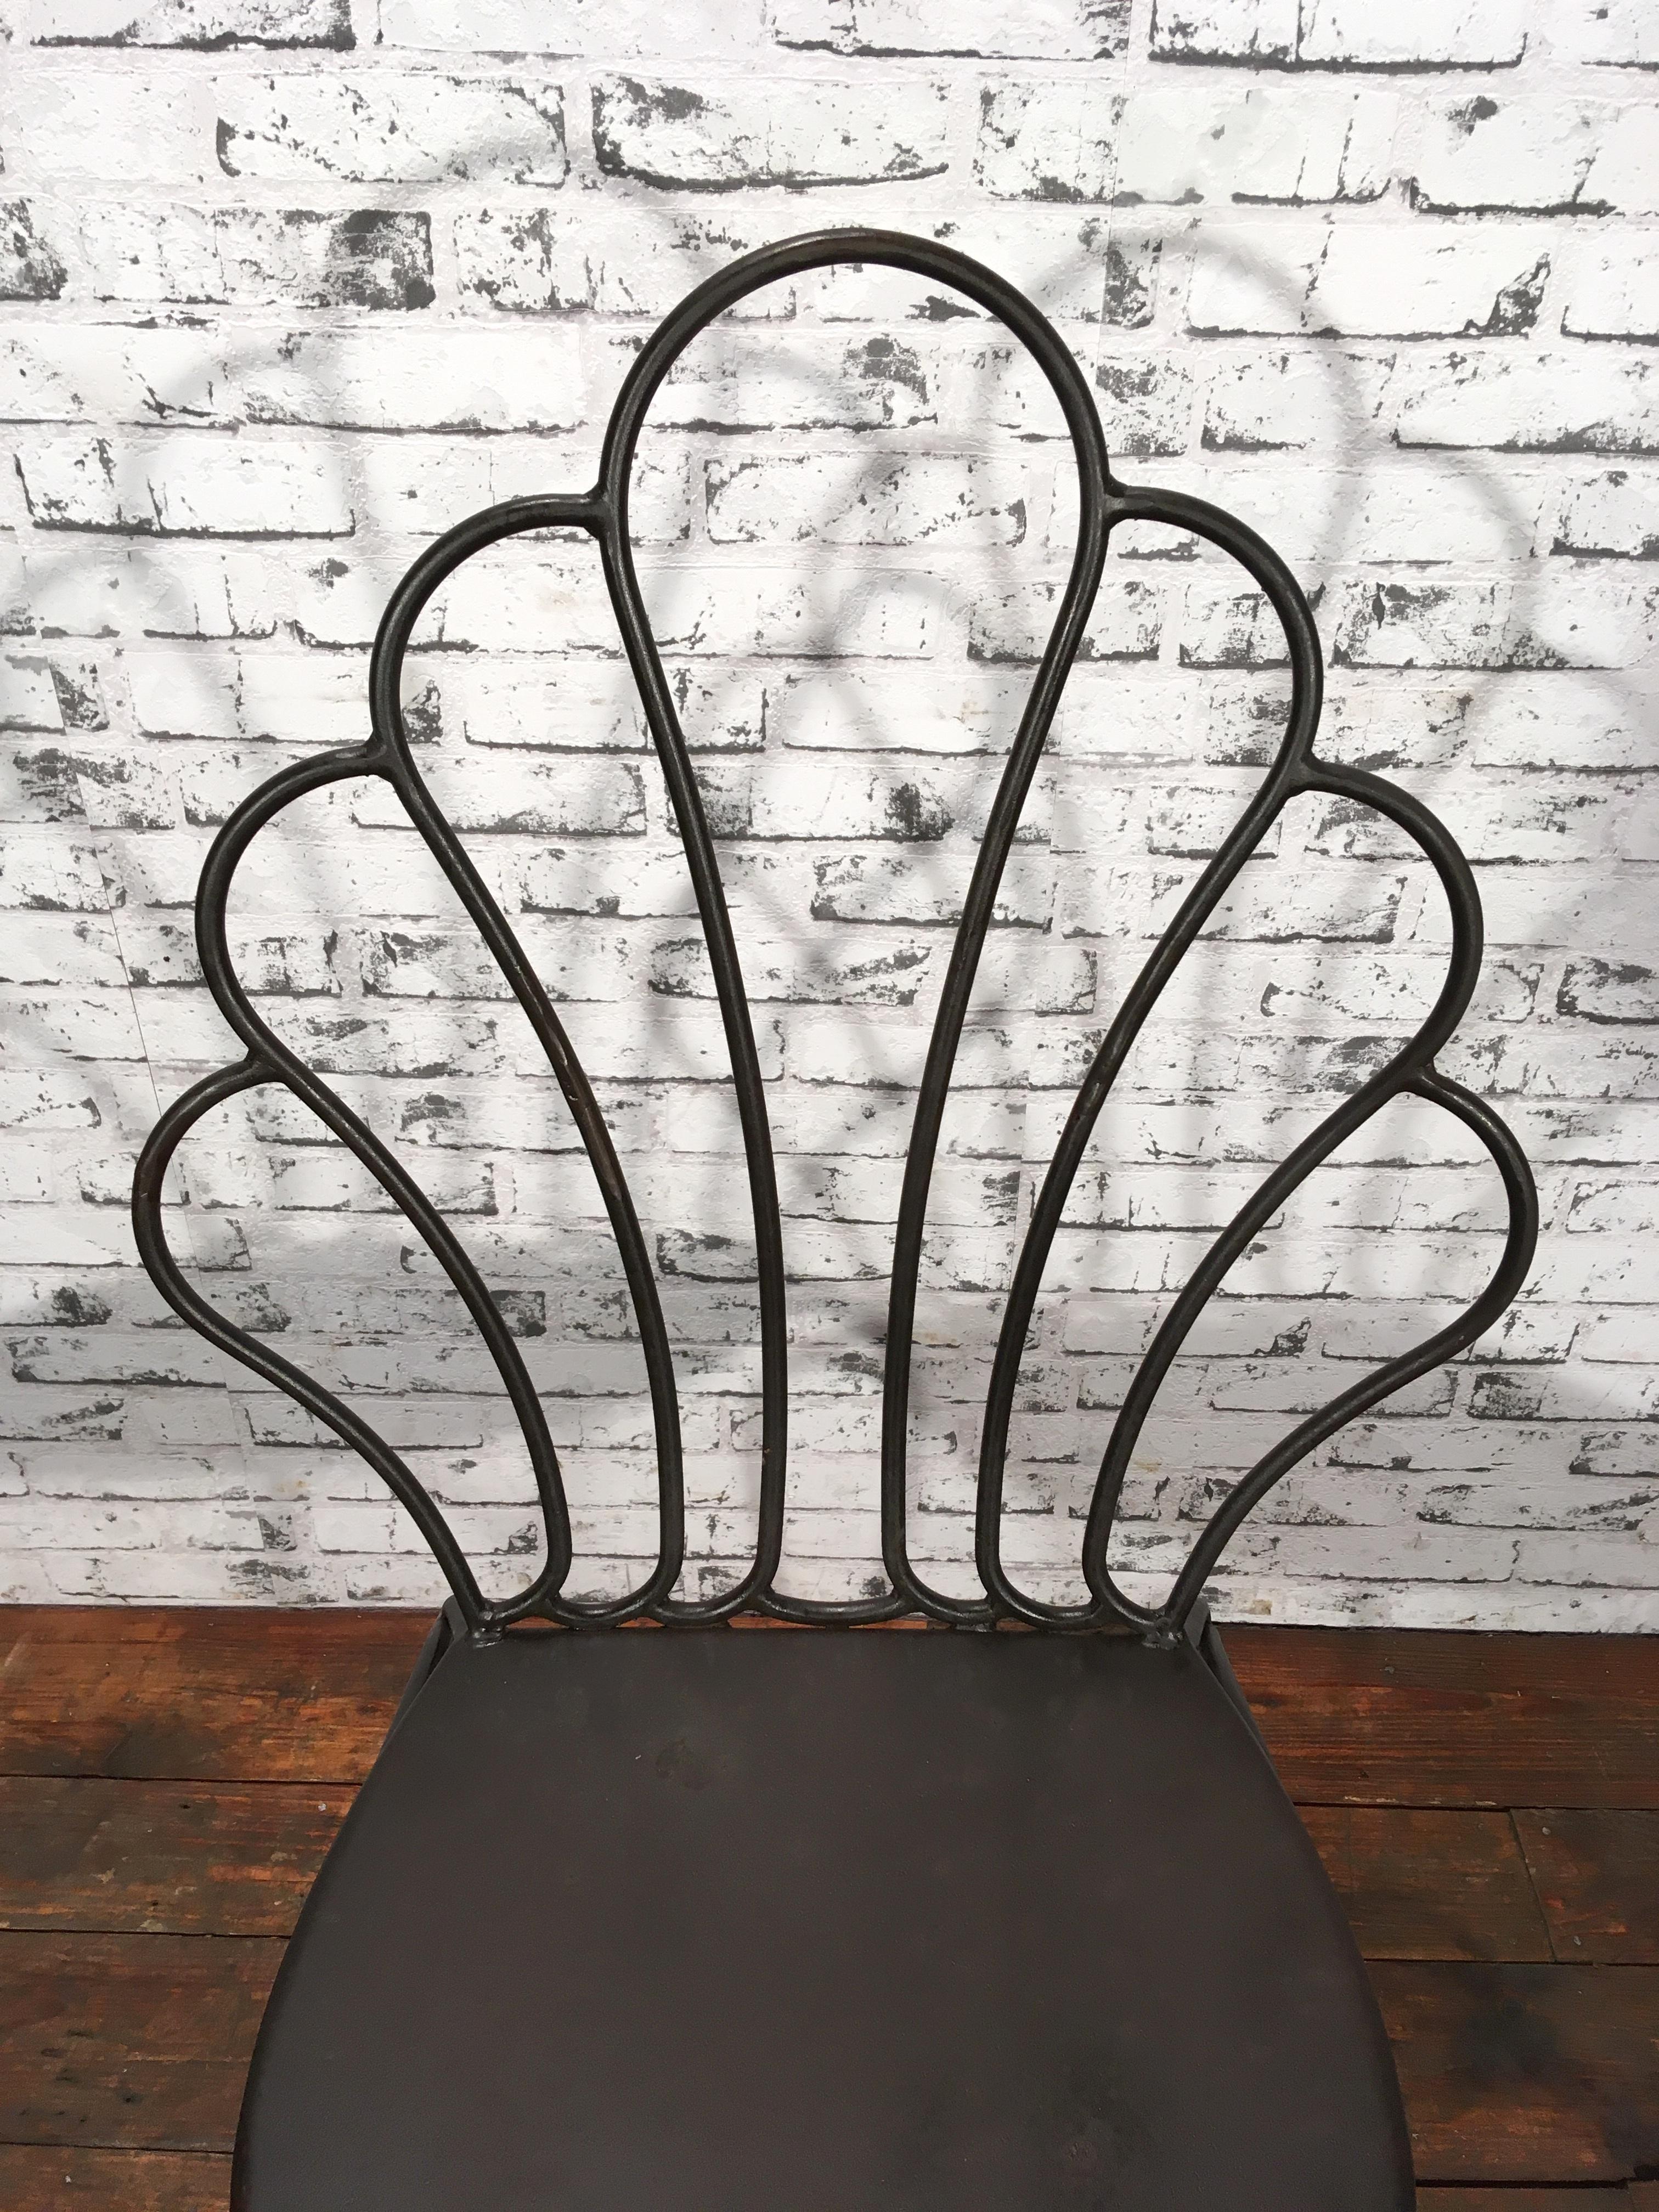 Industrial Vintage Iron Chair, 1930s